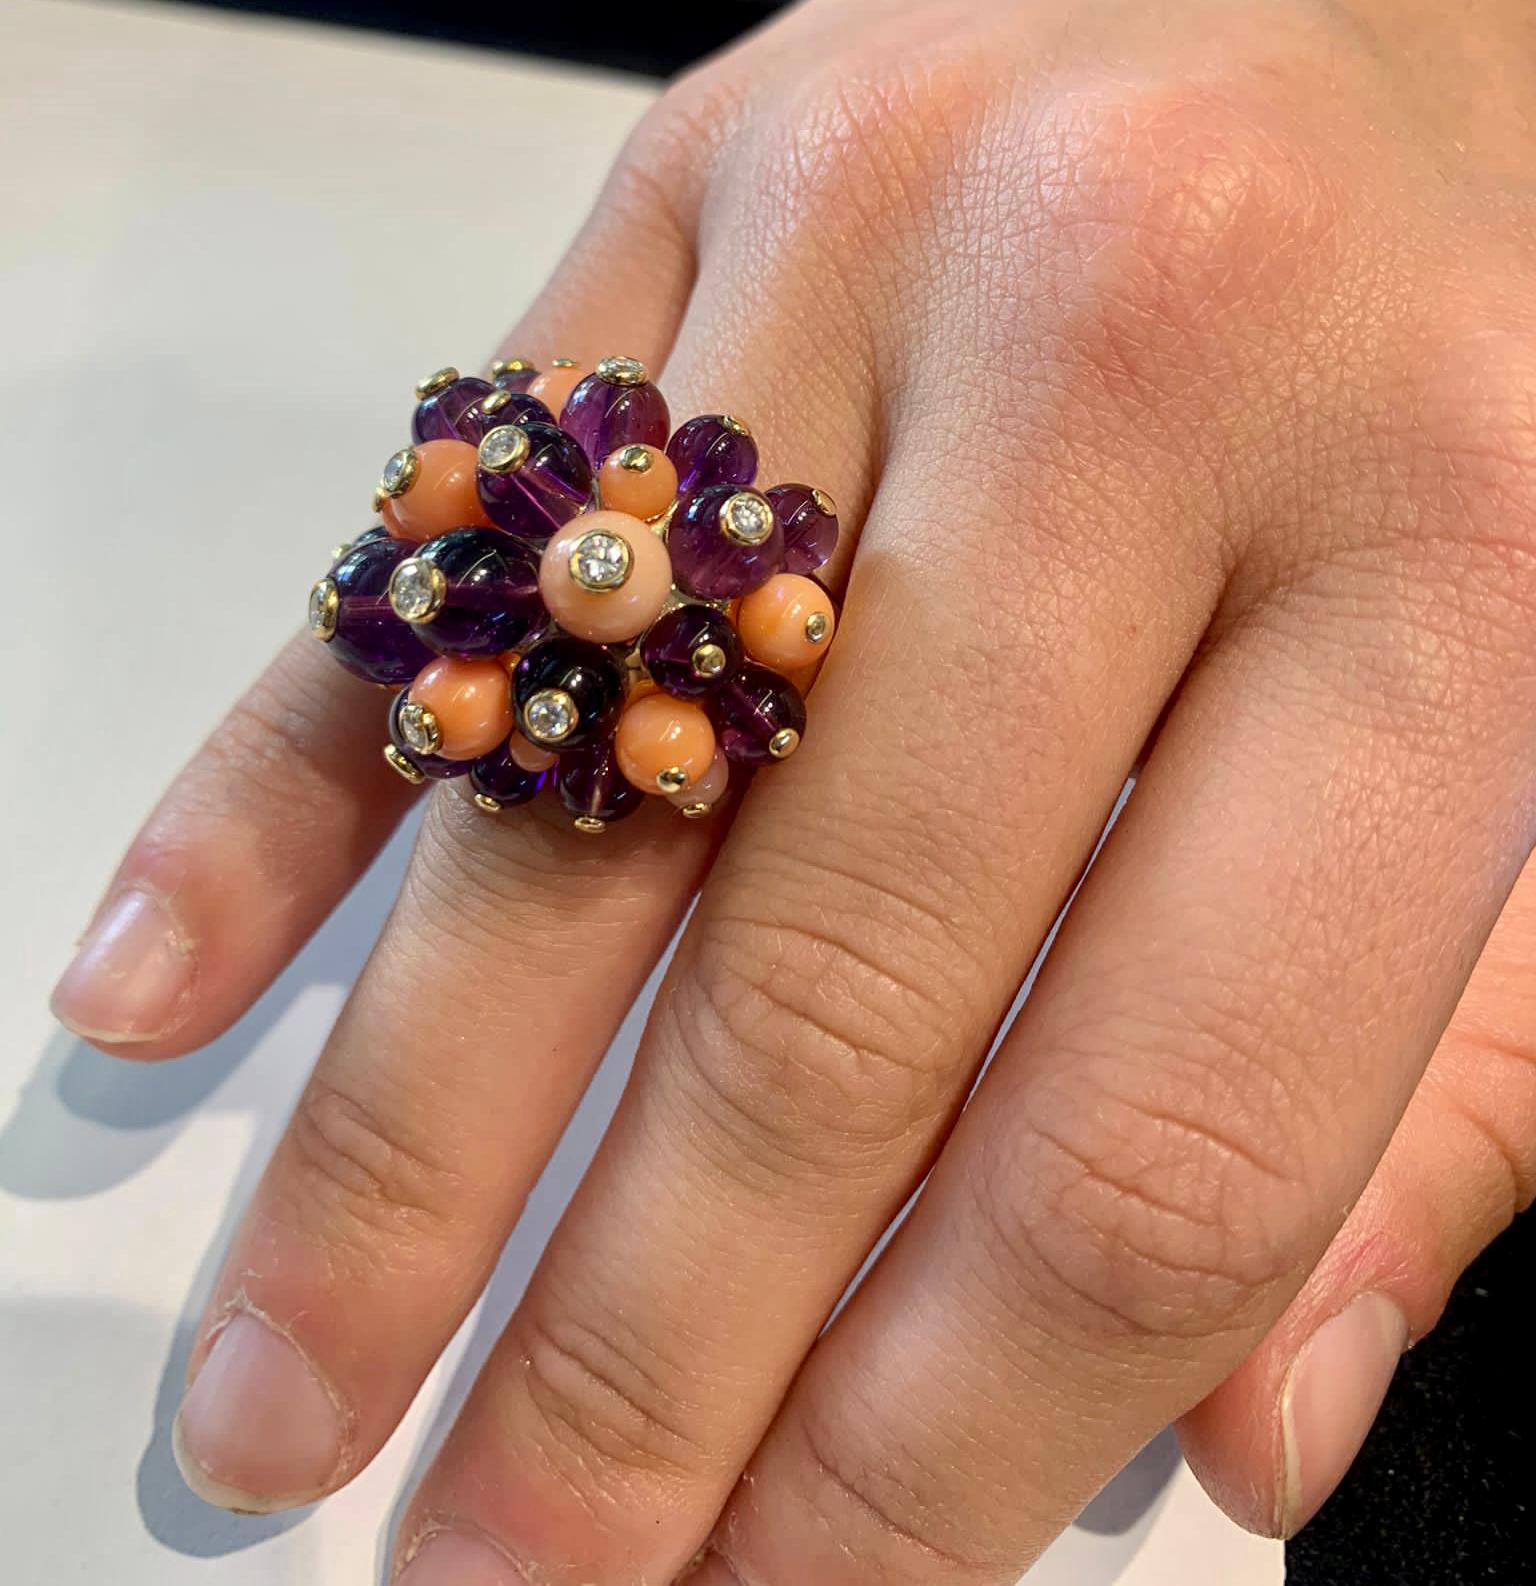 Brilliant Cut Cartier ‘Delice de Goa’ Ring with Amethyst, Diamonds and Coral in 18k Gold